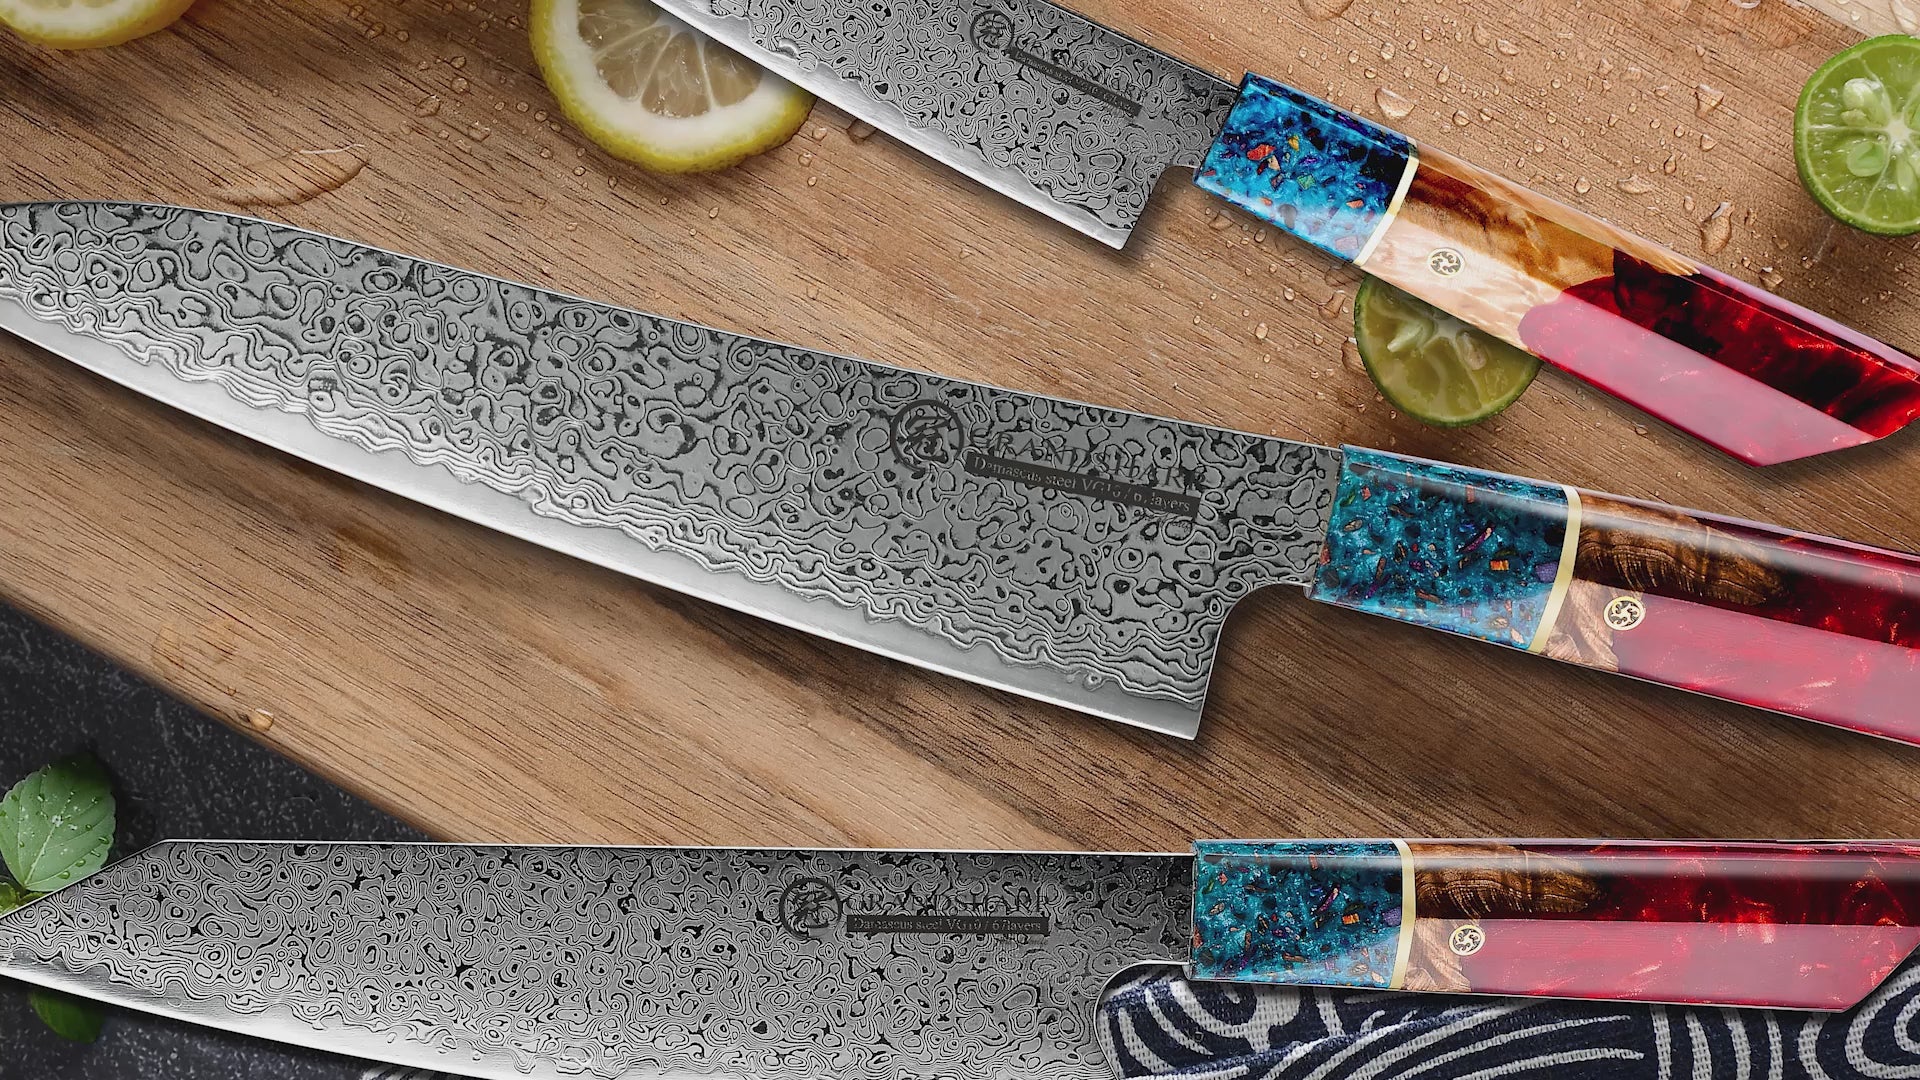 Damascus Knives VG10 67 Layer Stainless Steel Knives Chef Knife